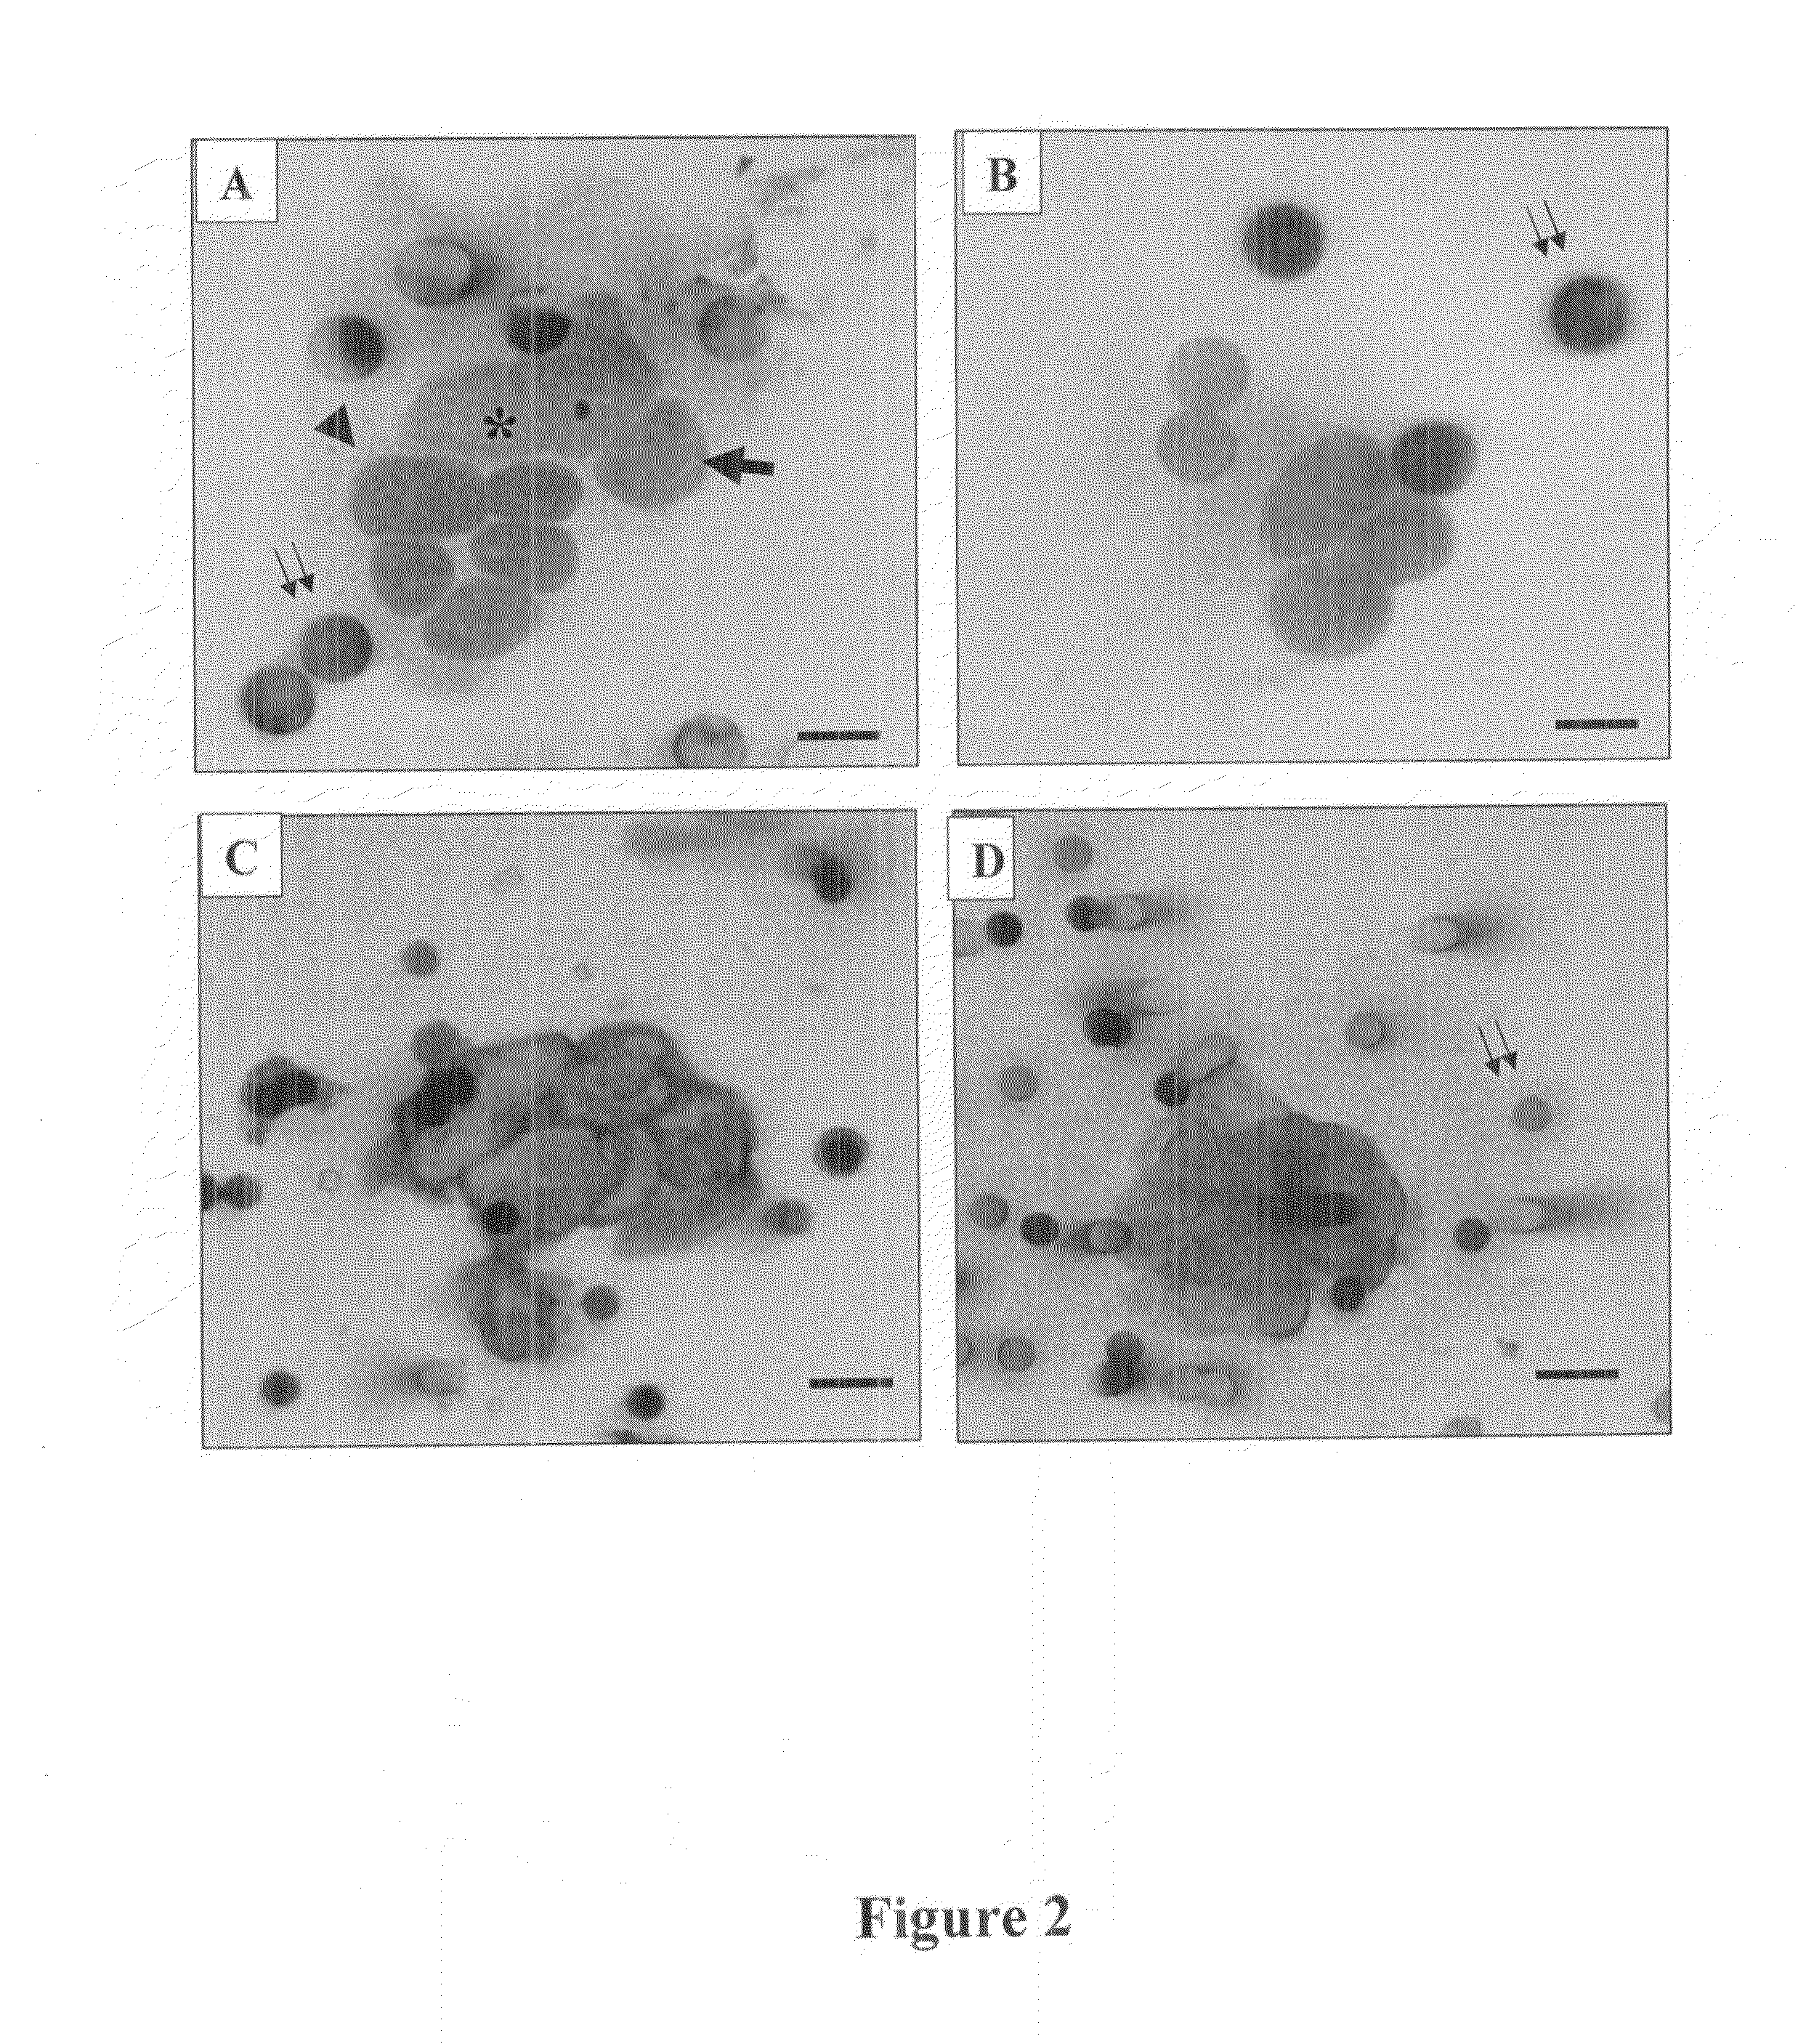 Process for multi-analyses of rare cells extracted or isolated from biological samples through filtration